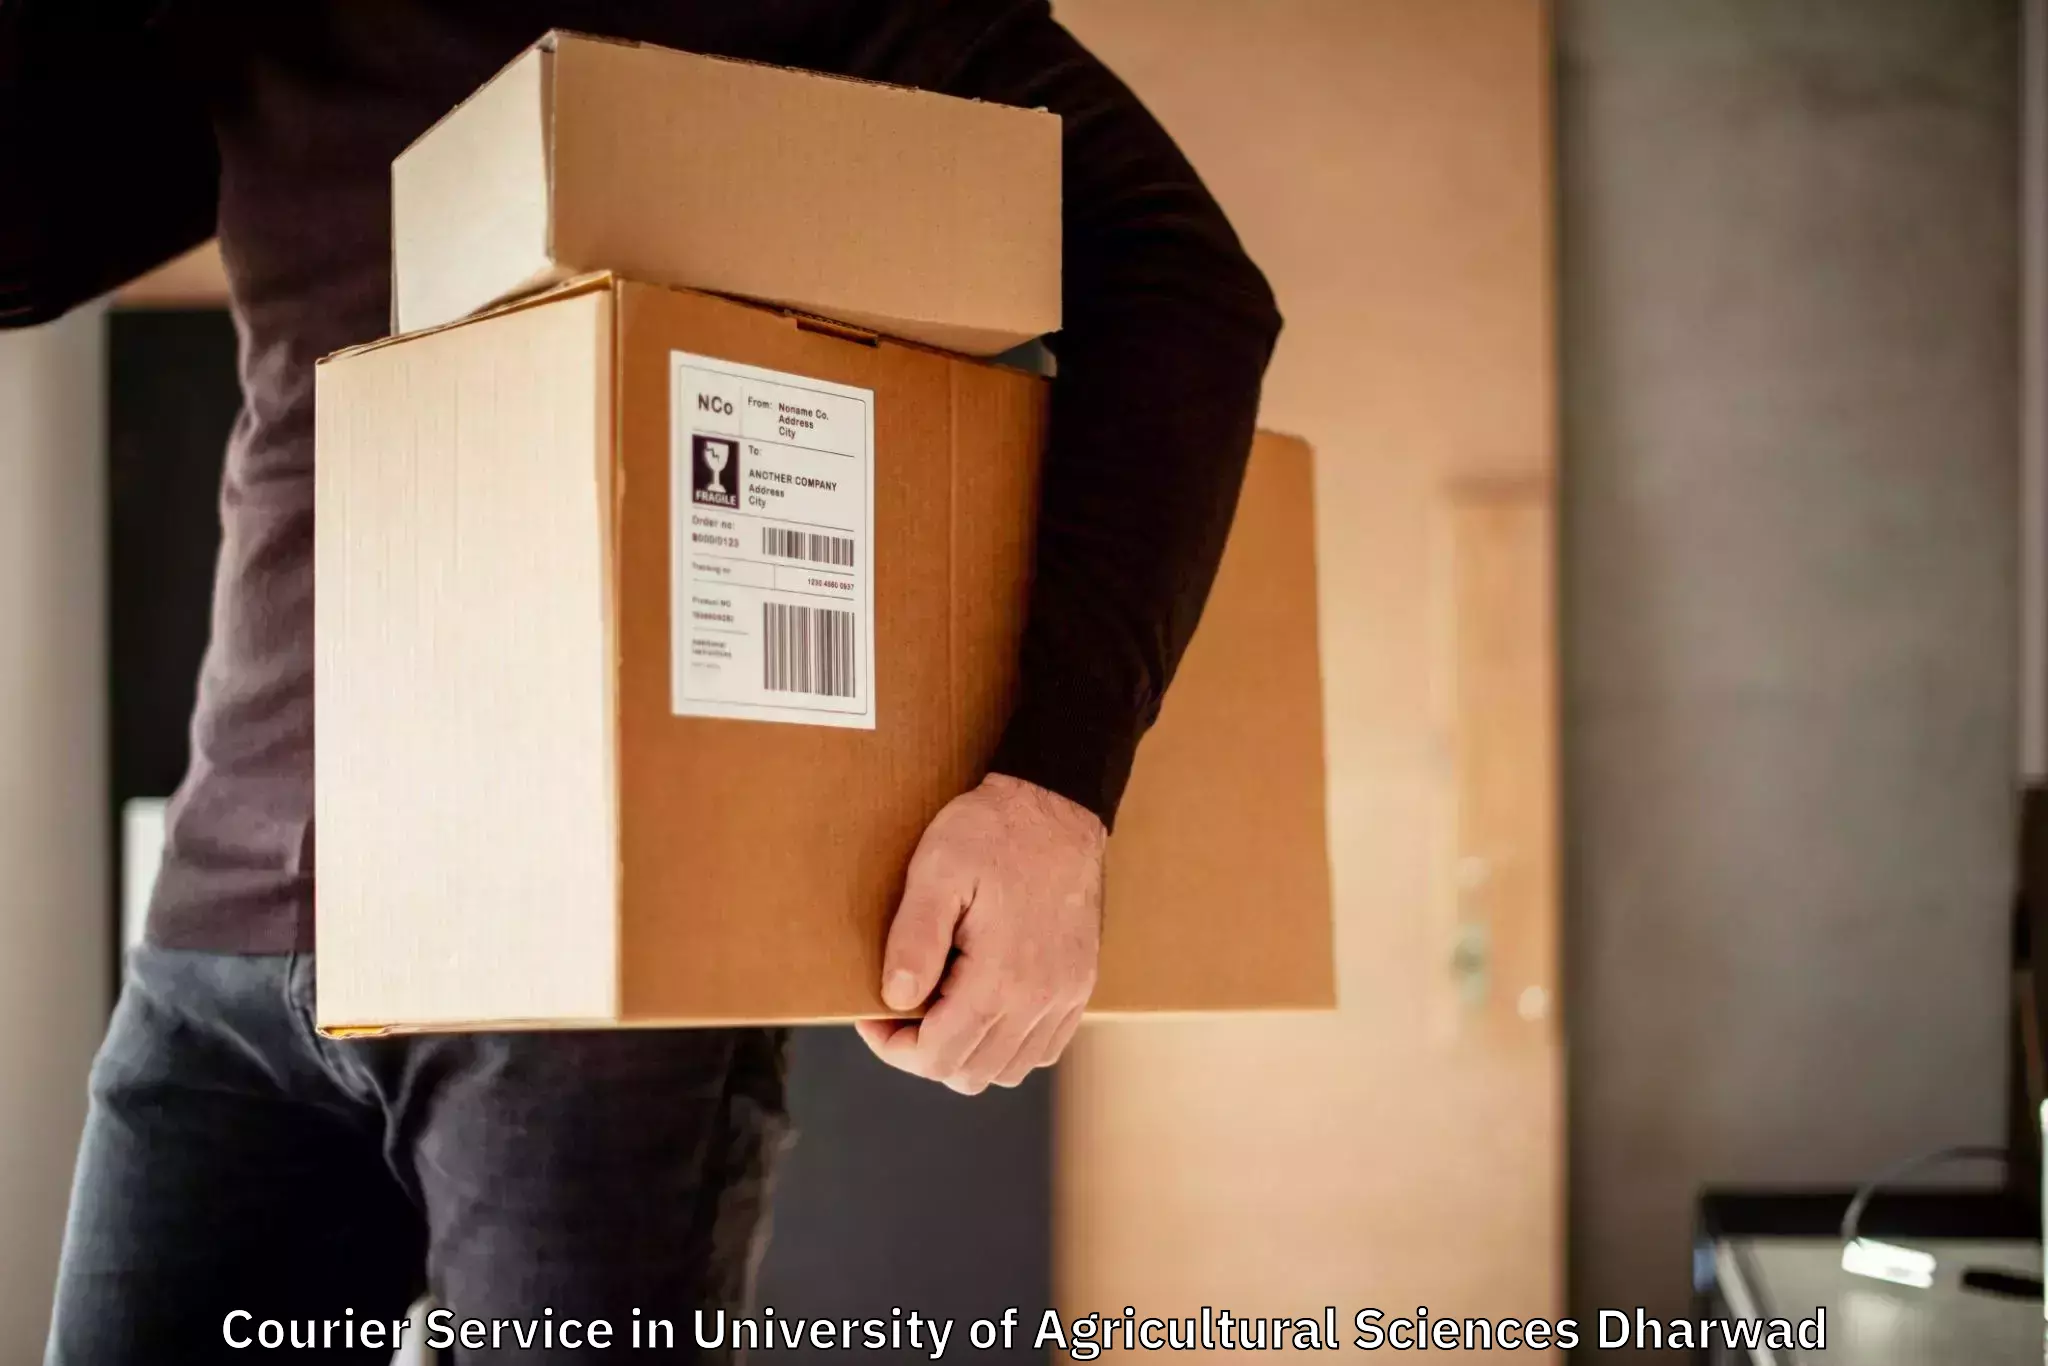 Personalized courier experiences in University of Agricultural Sciences Dharwad